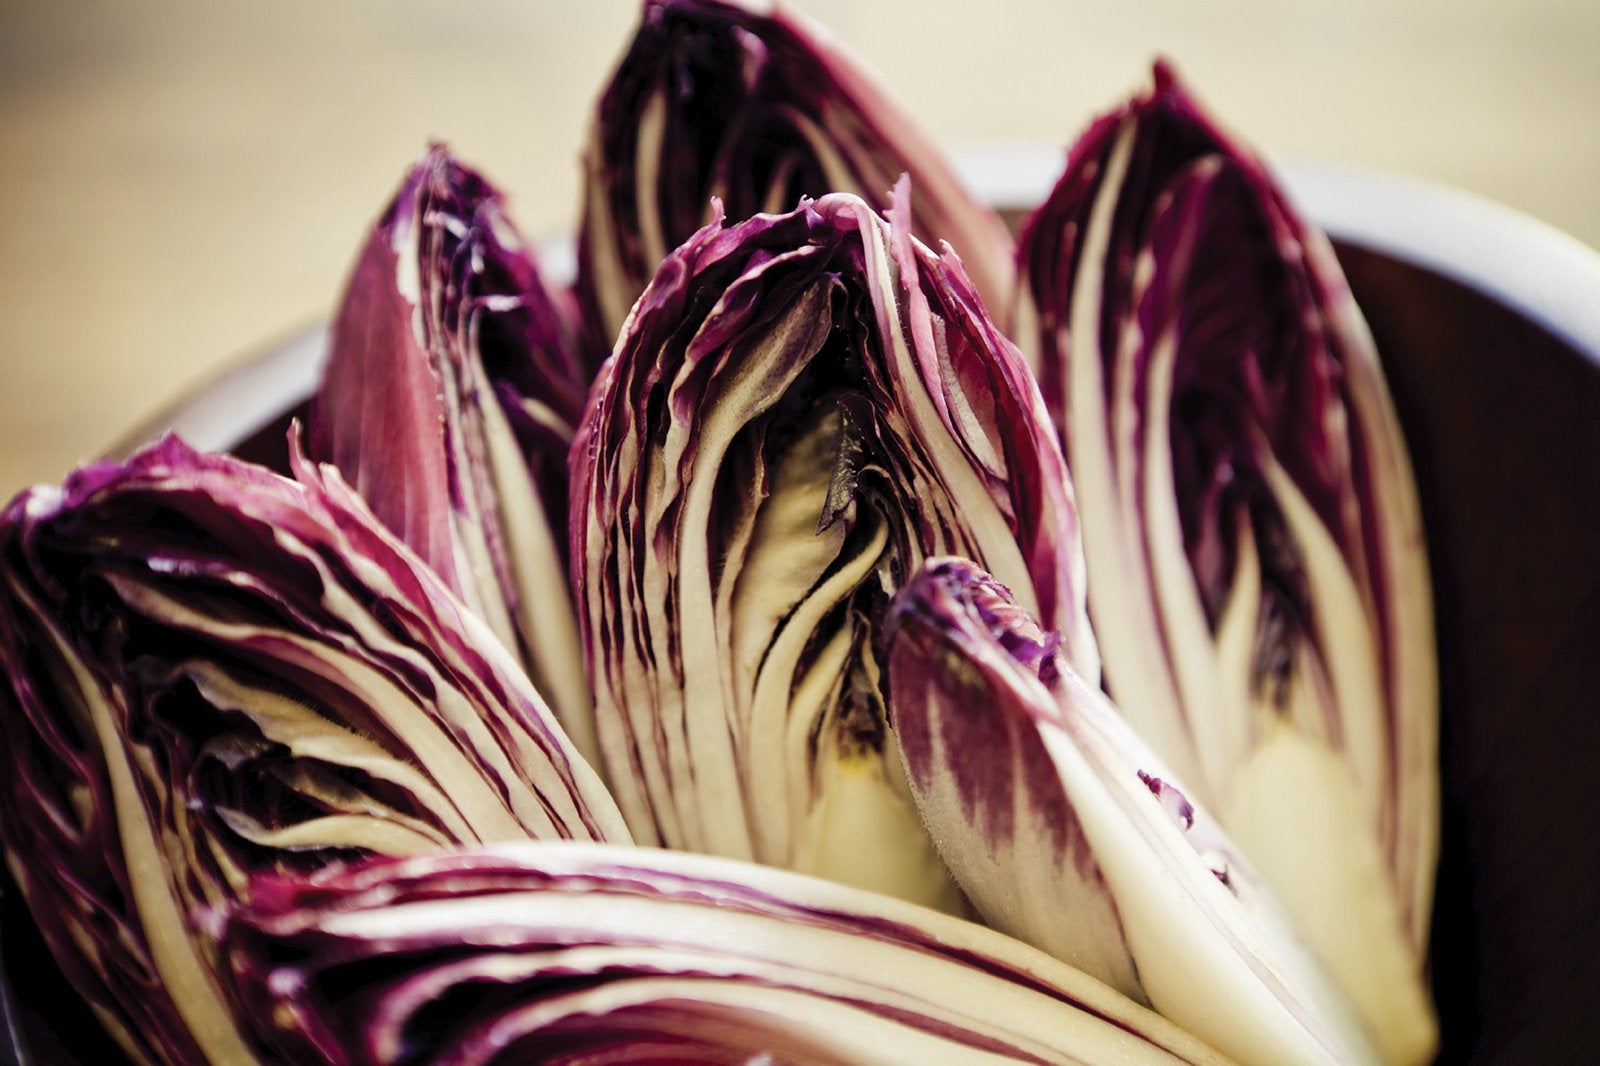 Benefits of chicory for pet's digestive health